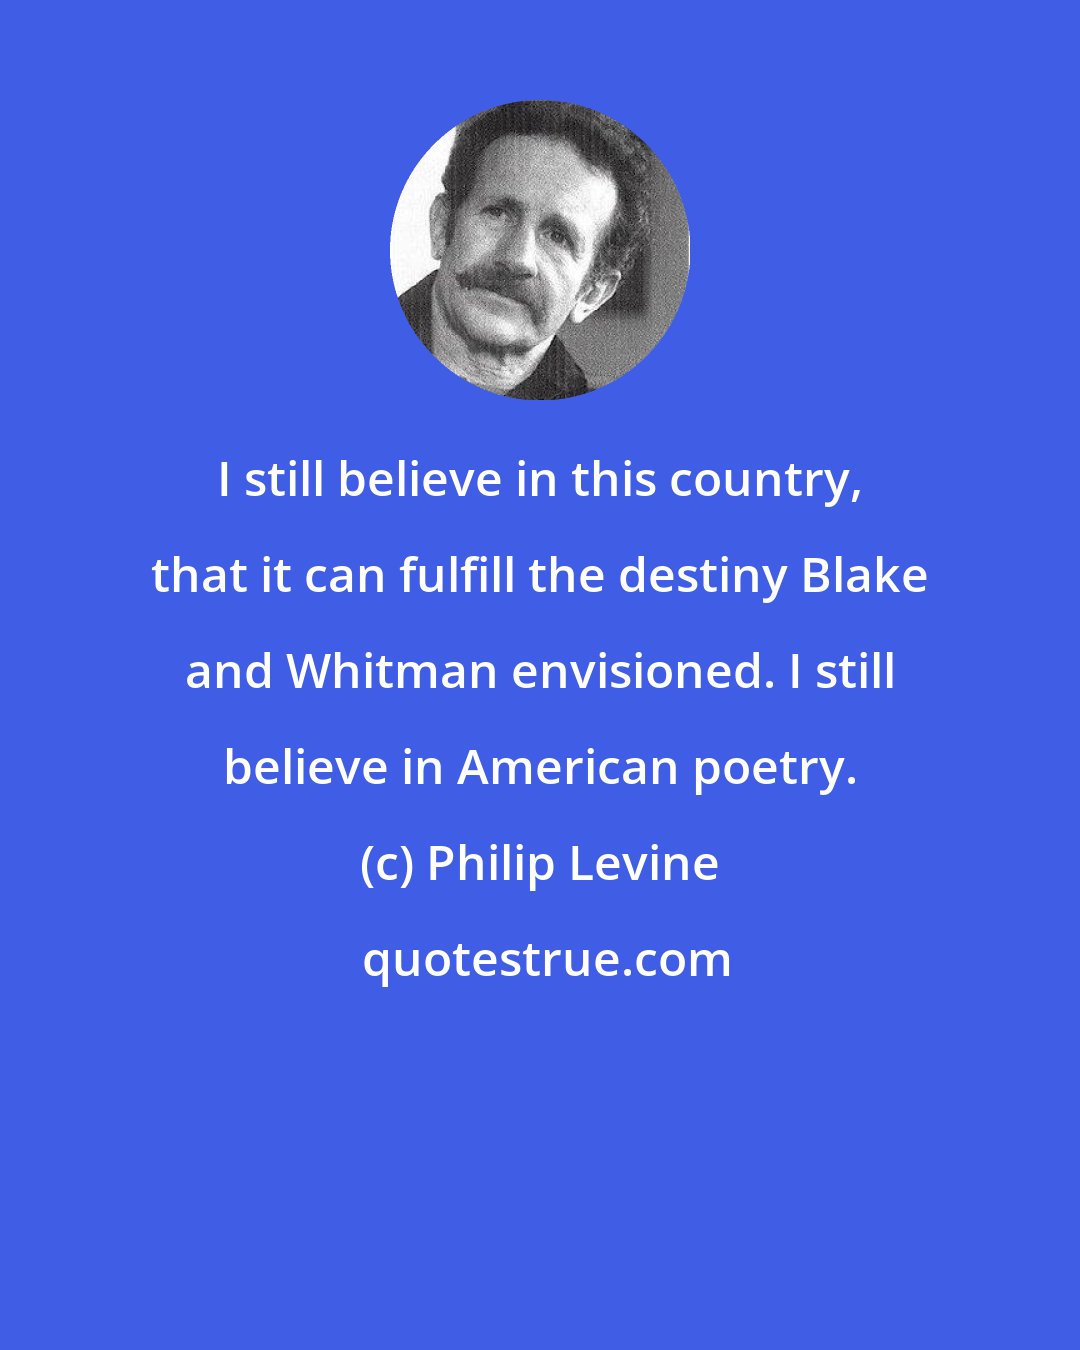 Philip Levine: I still believe in this country, that it can fulfill the destiny Blake and Whitman envisioned. I still believe in American poetry.